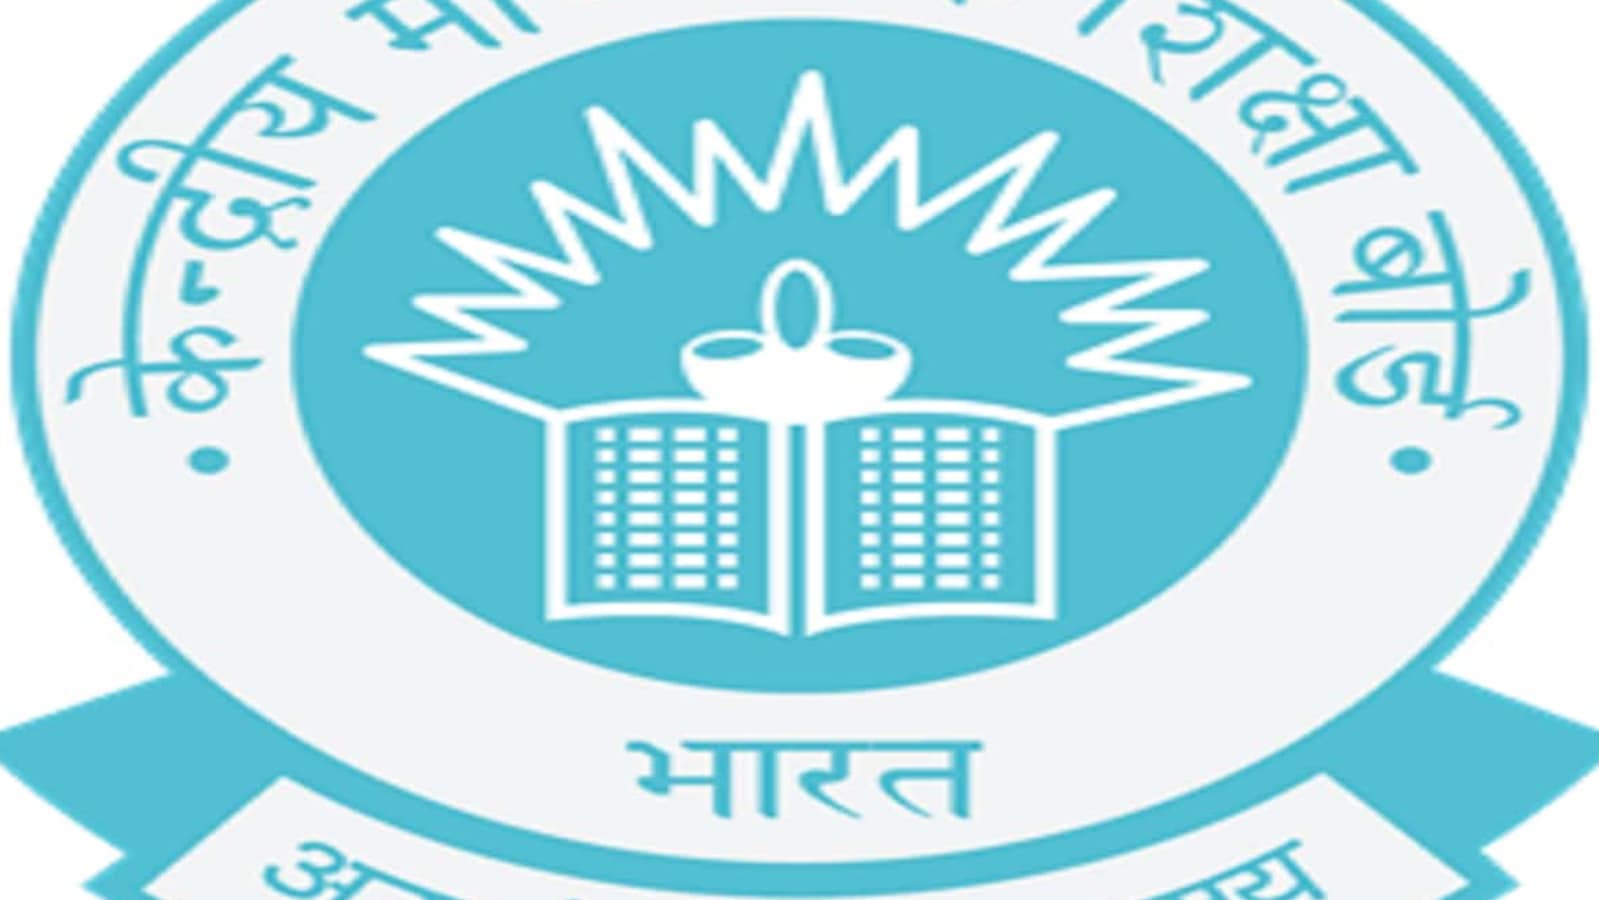 CBSE 10th Result 2021 Live Updates: CBSE result at cbseresults.nic.in soon